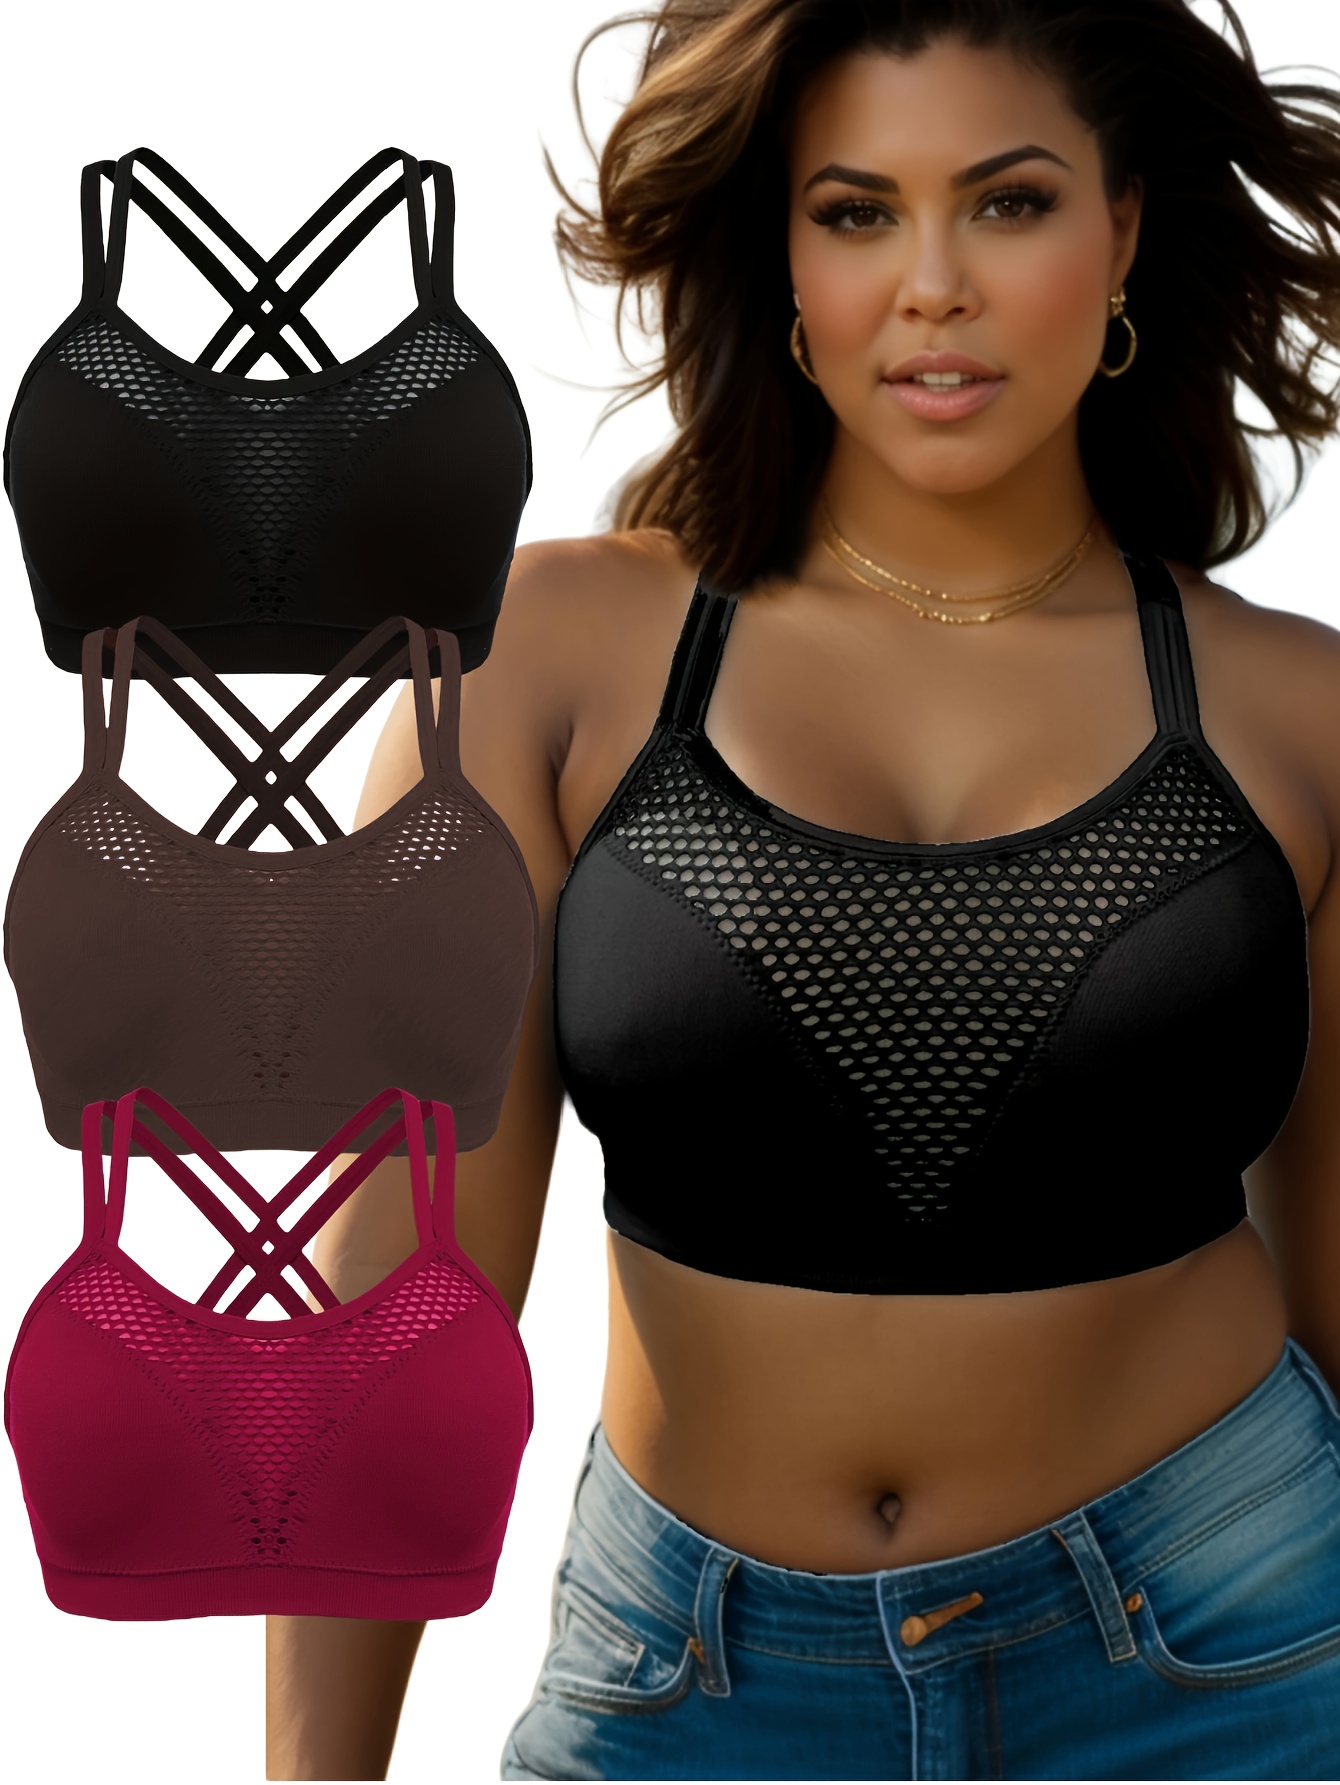 3 Pack Plus Size Sports Bra Set Women's Plus Ruched Seamless Full